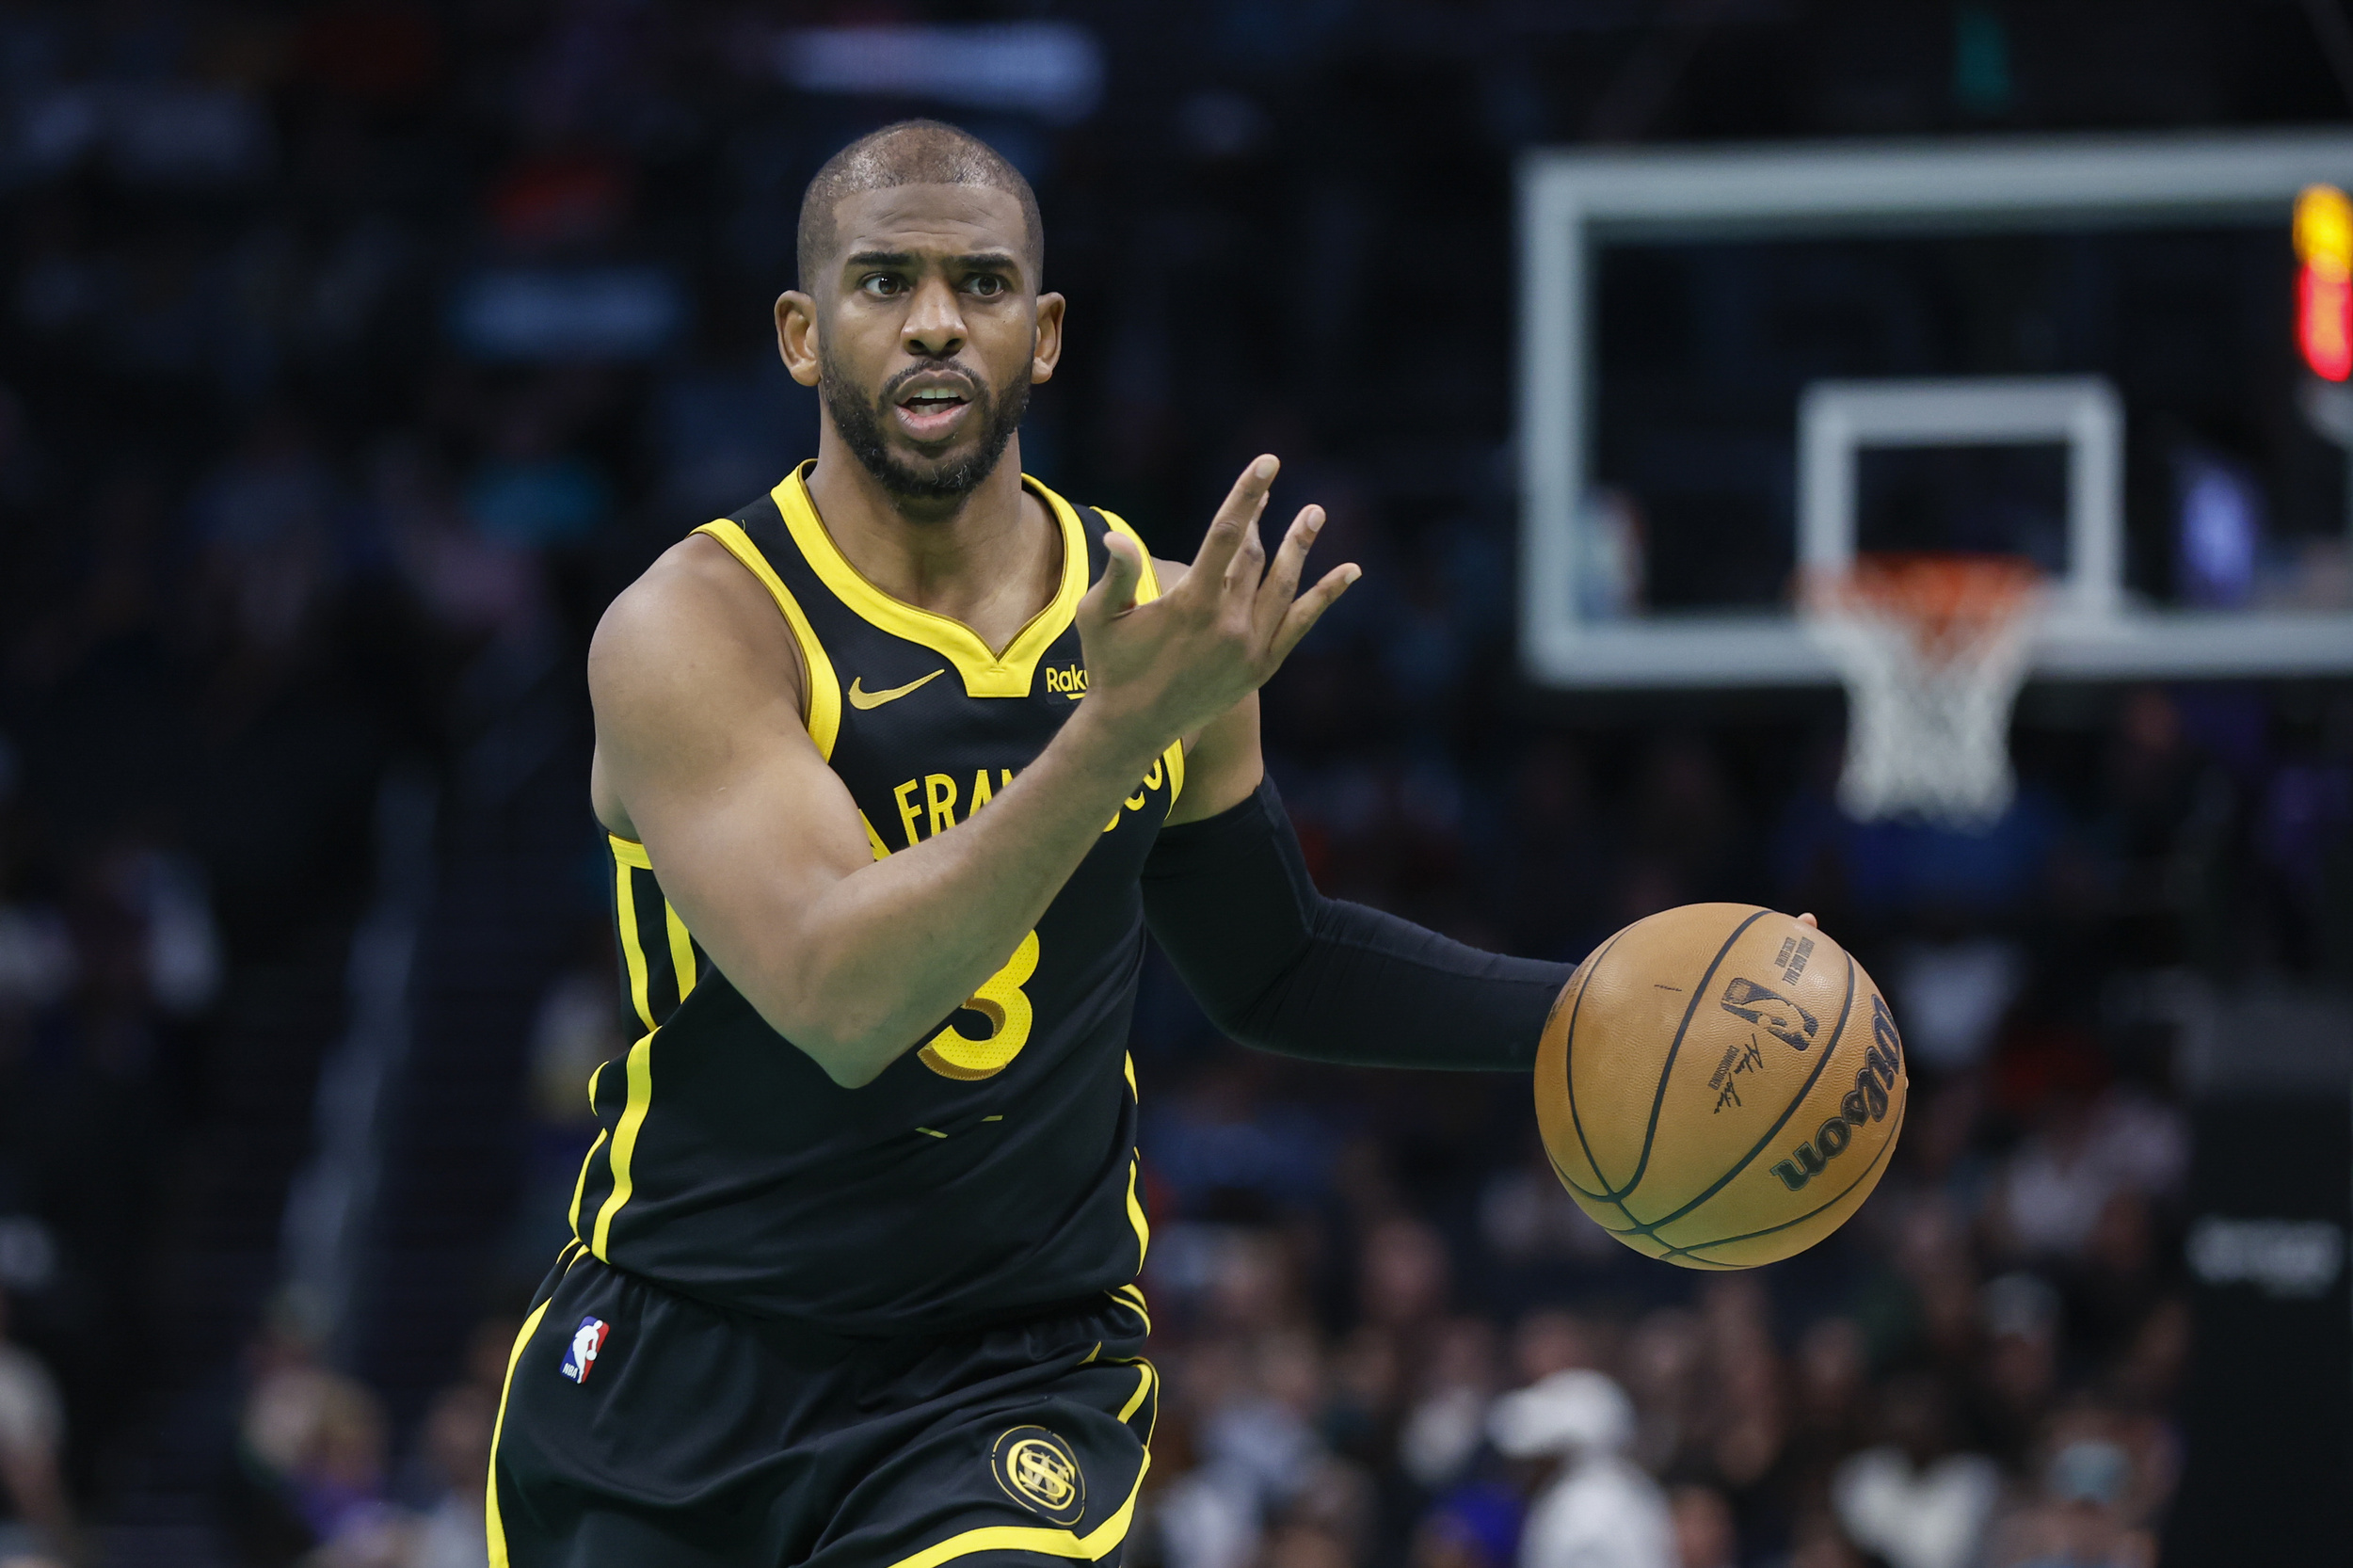 the two best fits for chris paul, who's probably done with warriors